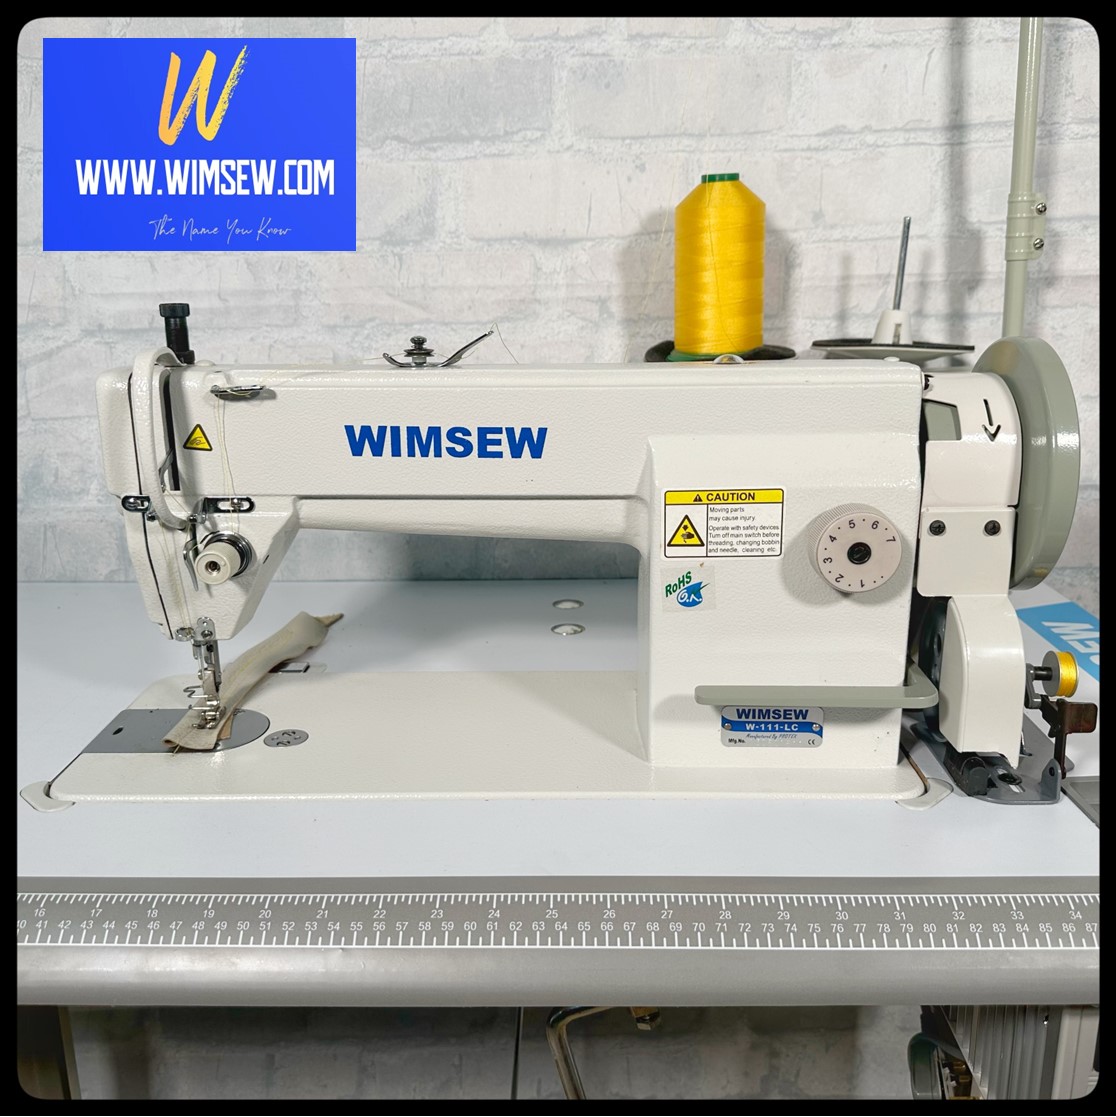 WIMSEW 111LC Machine ('Z' Stand) - Call now for more information. 020 8767 0036 - choose option 3